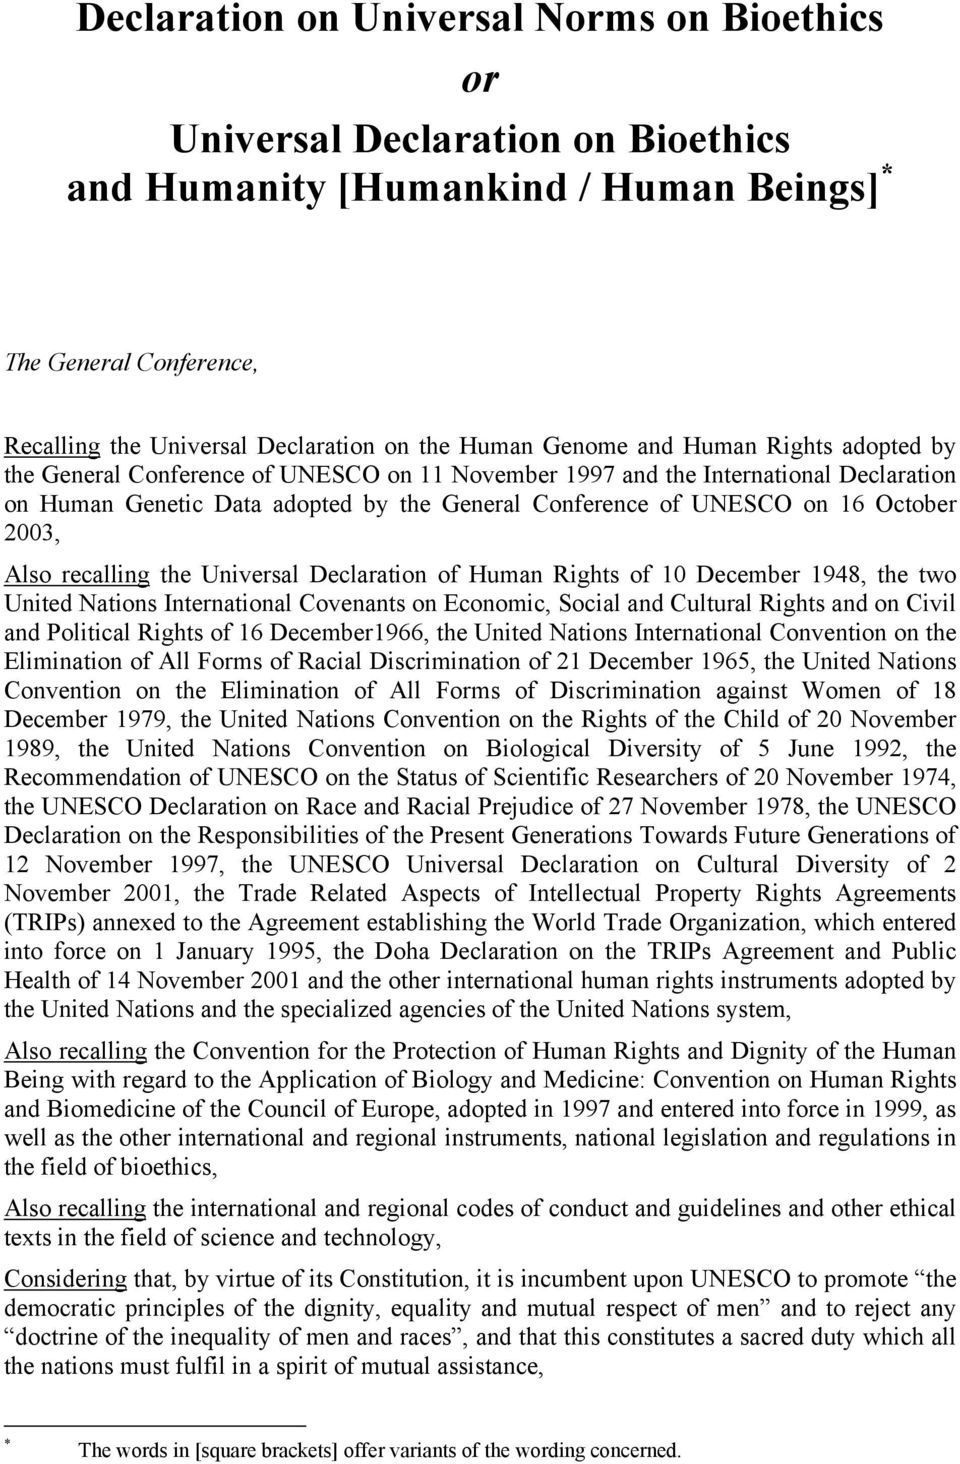 October 2003, Also recalling the Universal Declaration of Human Rights of 10 December 1948, the two United Nations International Covenants on Economic, Social and Cultural Rights and on Civil and